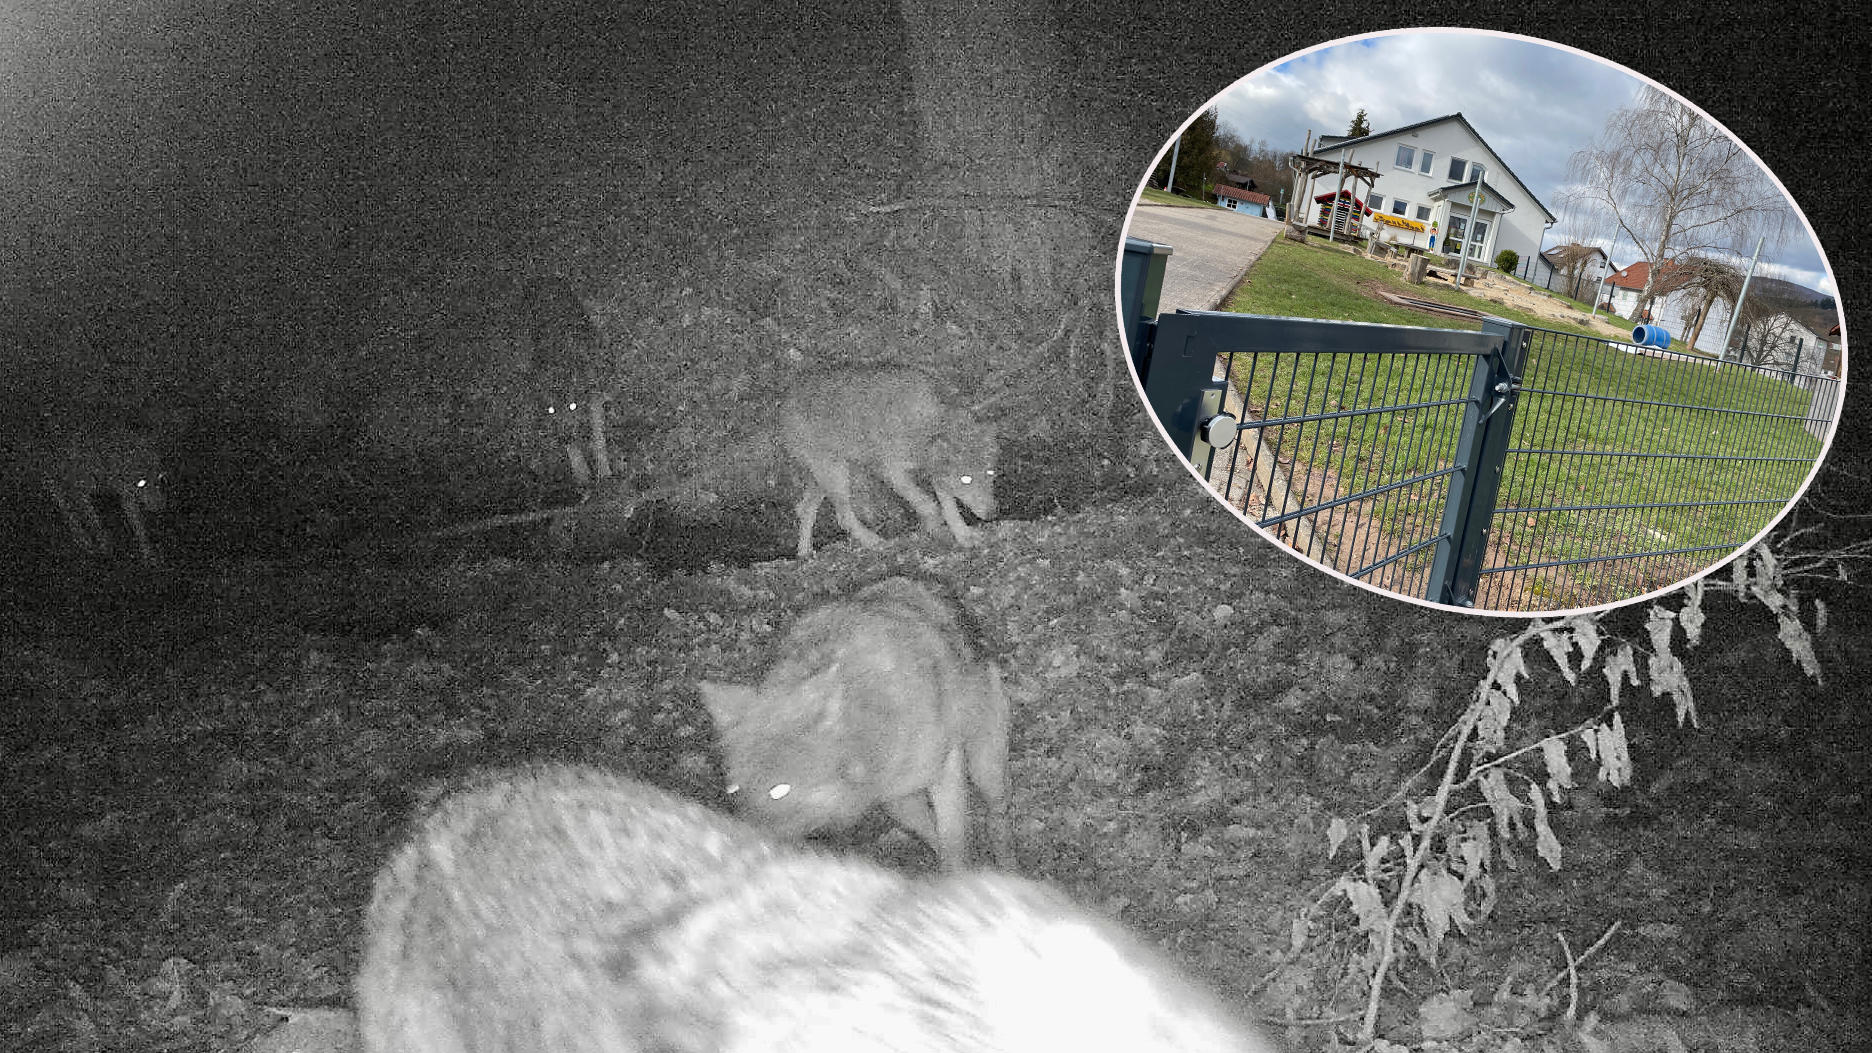 Predators take over kindergarten territory in Waldkappel Forest becomes a restricted zone